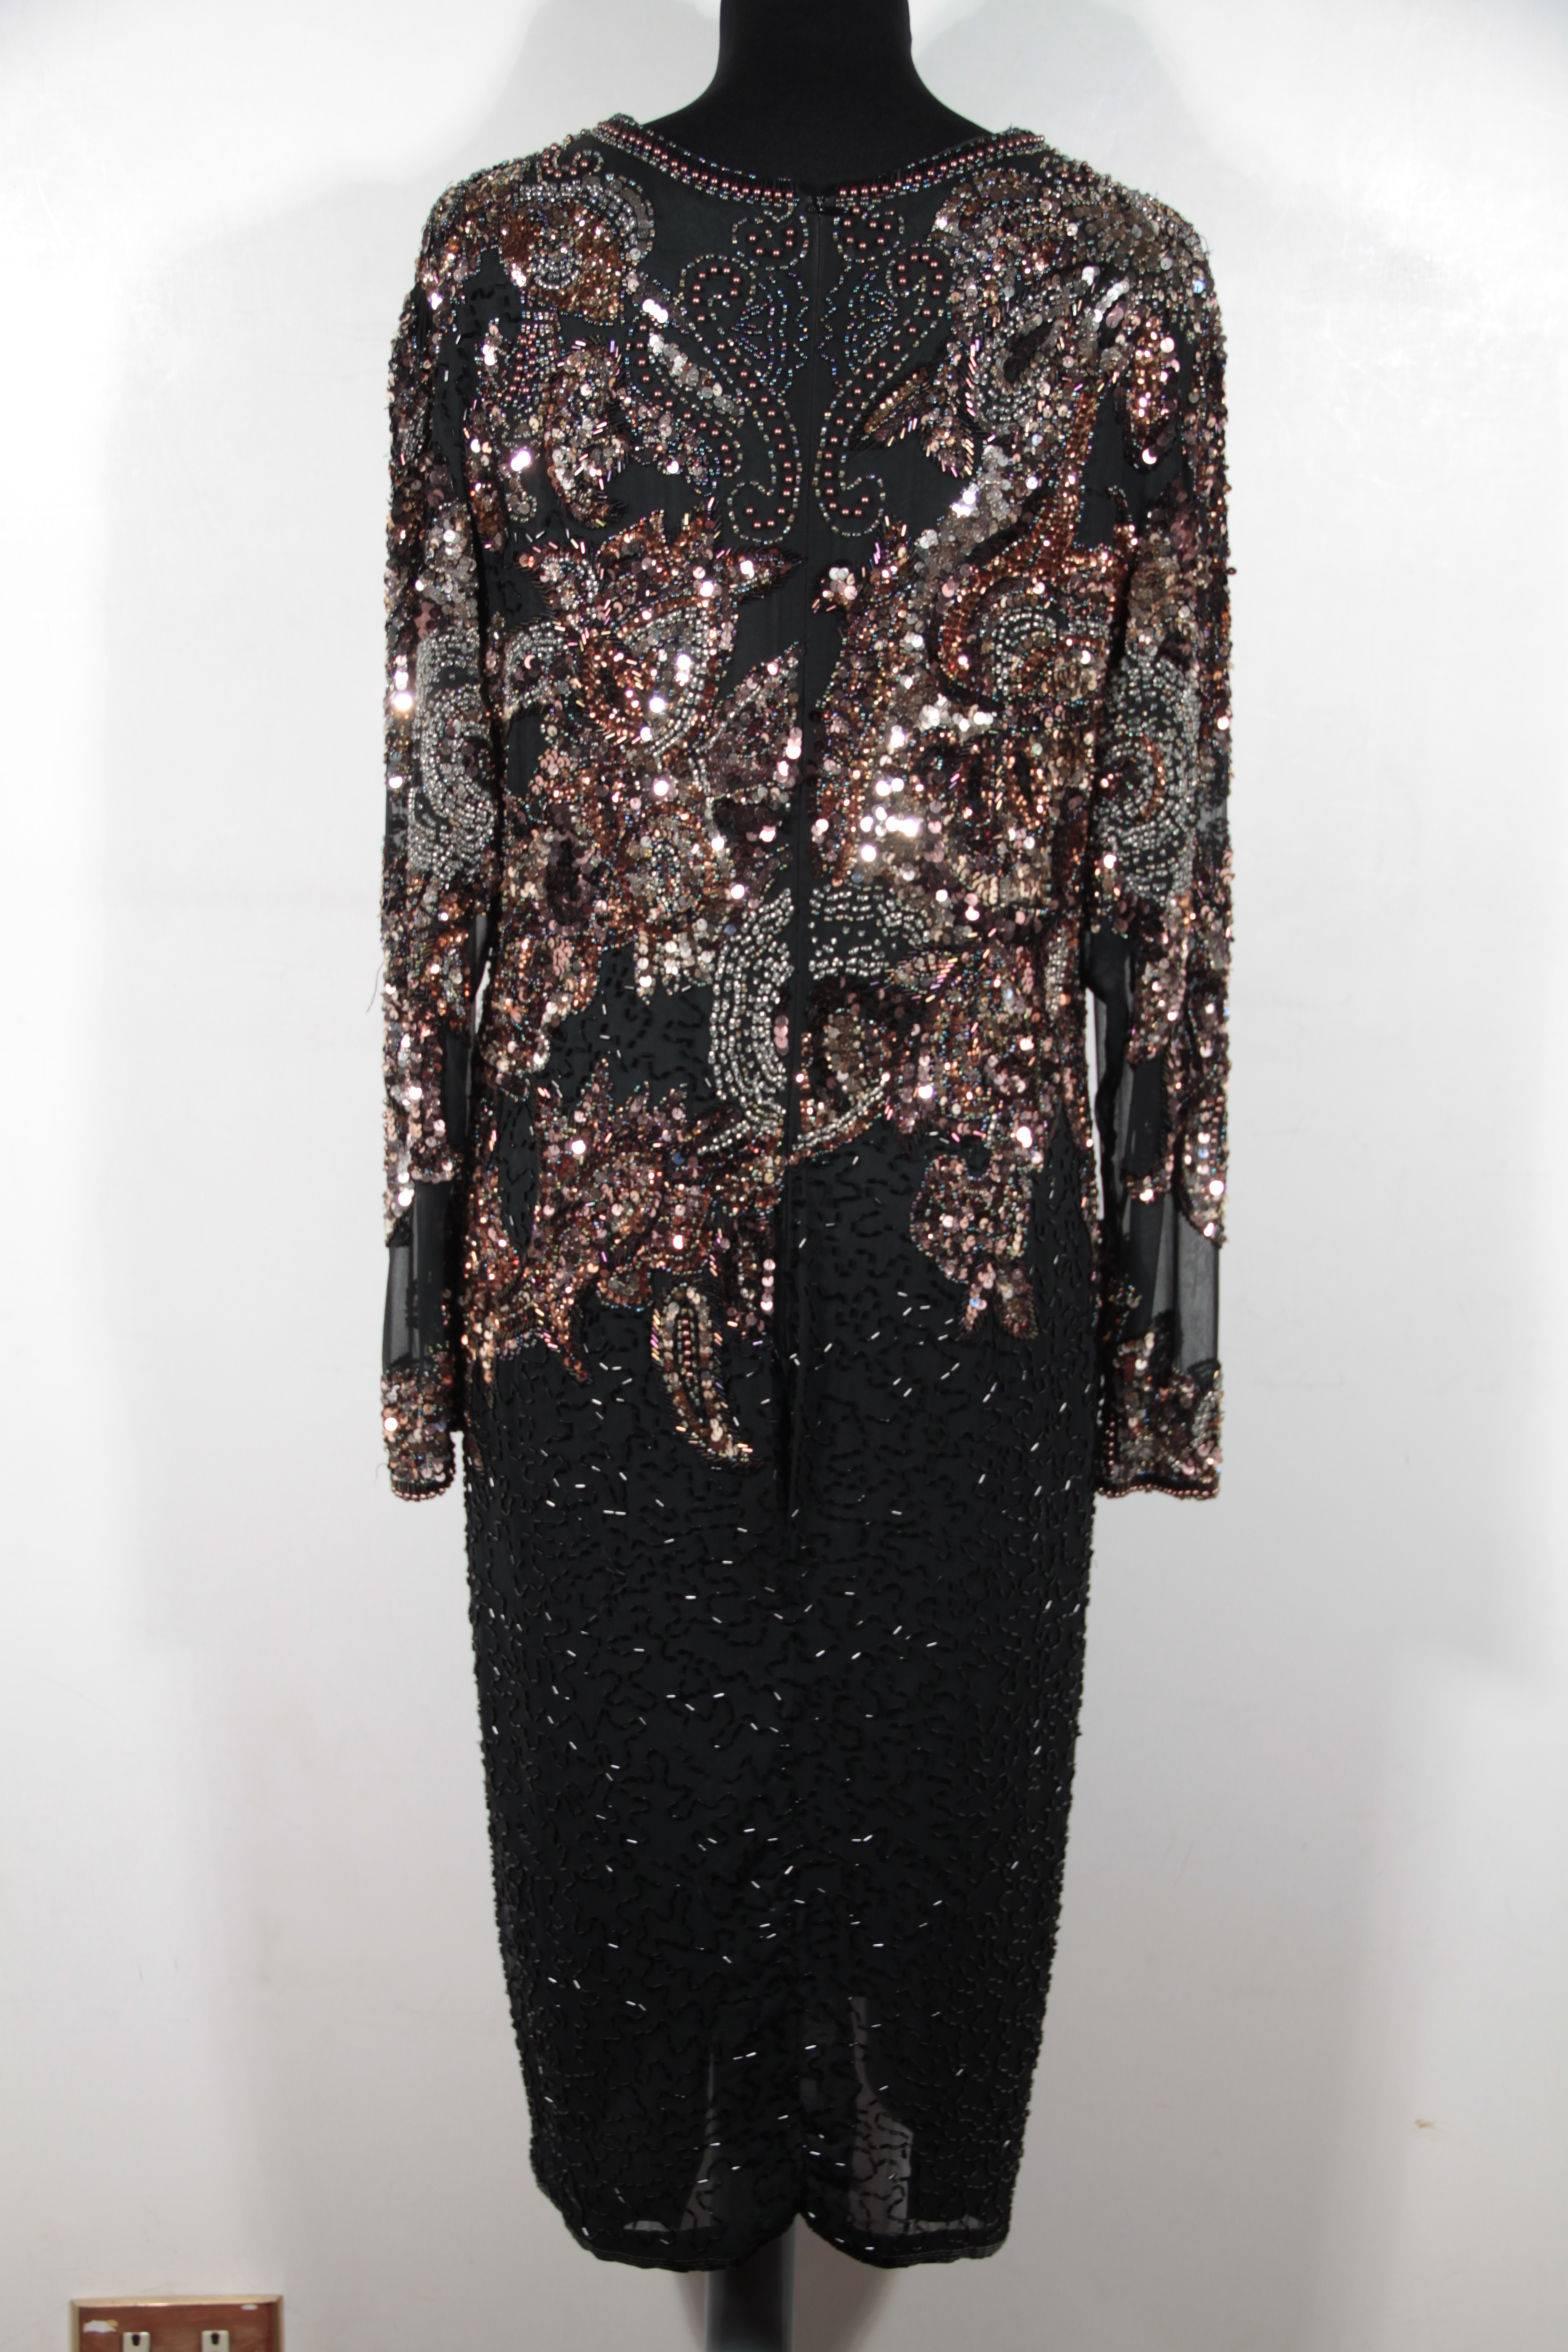 Auth BLACK TIE by OLEG CASSINI Vintage Black Beaded EVENING DRESS Size M In Excellent Condition In Rome, Rome